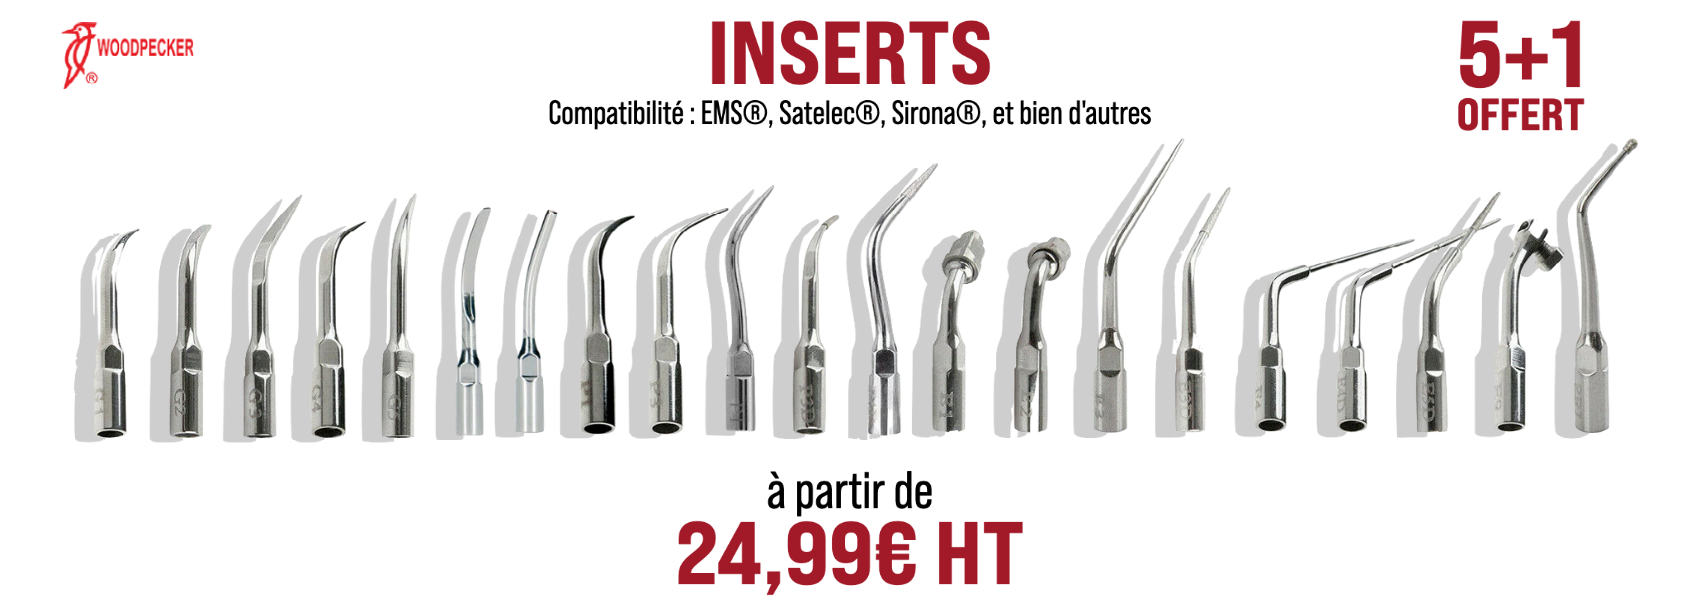 inserts-dentaires-woodpecker-sirona-satelec-ems-kavo-materiel-dentaire-france